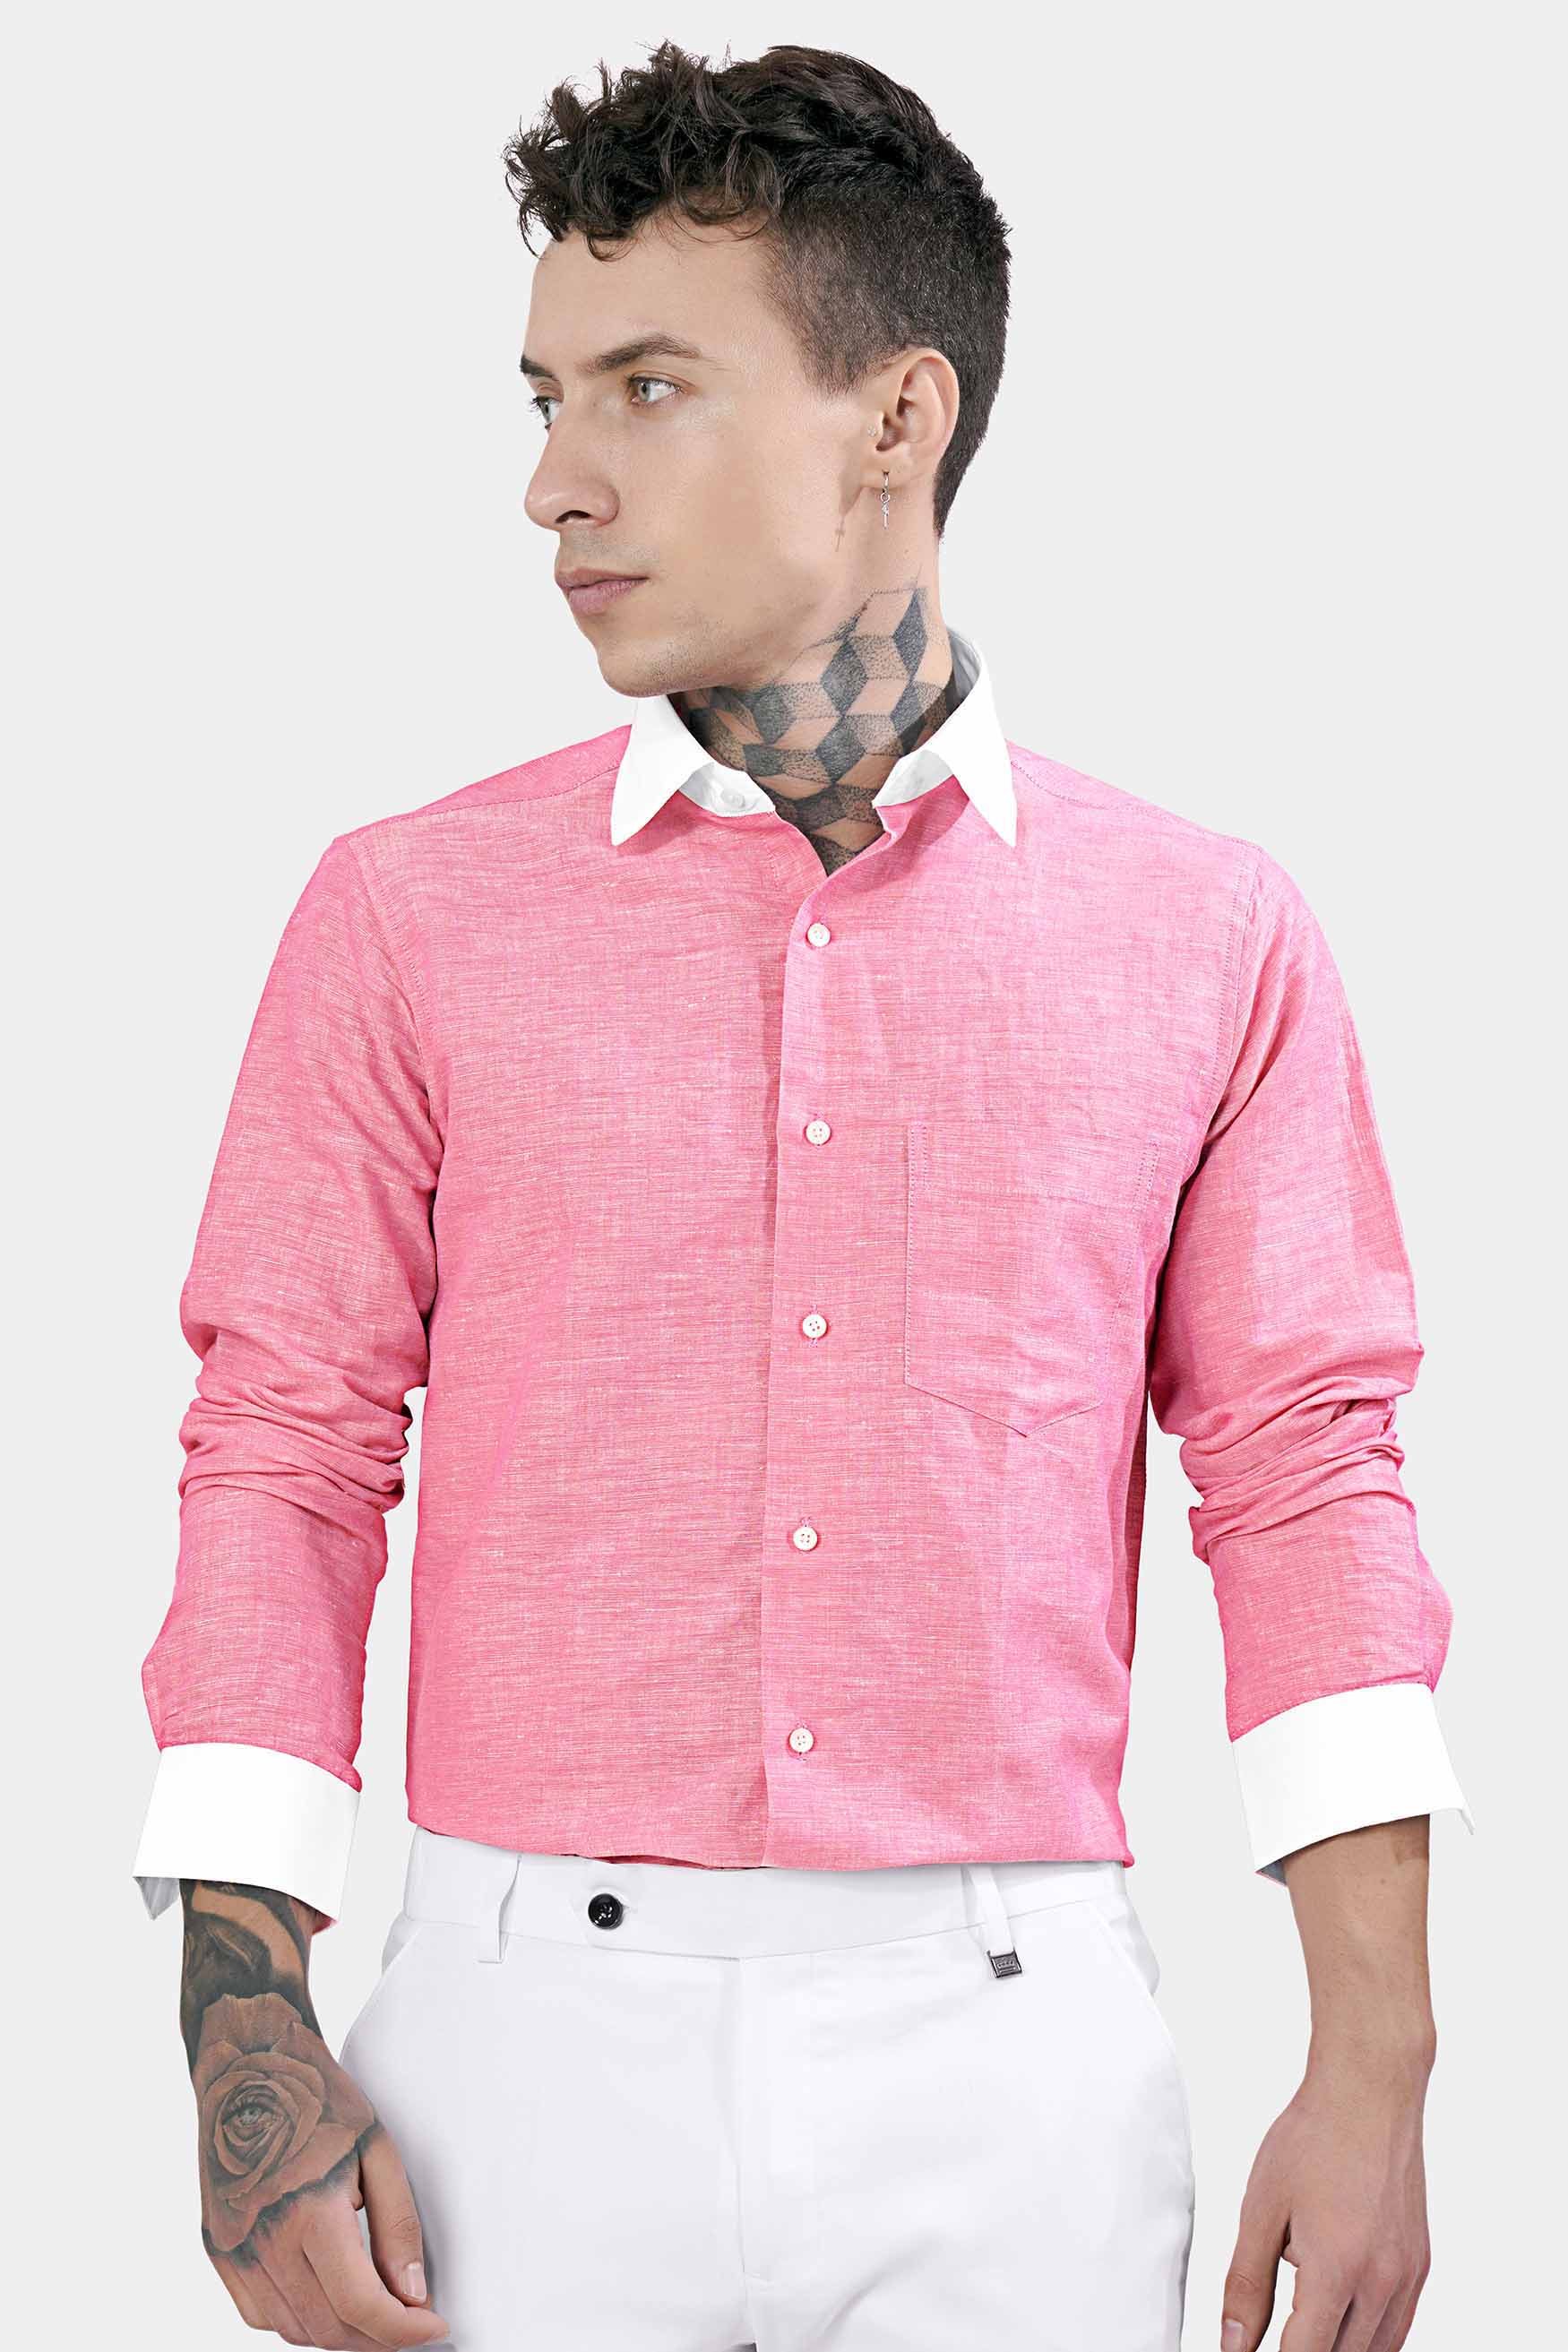 Flamingo Pink with White Cuffs and Collar Luxurious Linen Shirt 11462-WCC-38, 11462-WCC-H-38, 11462-WCC-39, 11462-WCC-H-39, 11462-WCC-40, 11462-WCC-H-40, 11462-WCC-42, 11462-WCC-H-42, 11462-WCC-44, 11462-WCC-H-44, 11462-WCC-46, 11462-WCC-H-46, 11462-WCC-48, 11462-WCC-H-48, 11462-WCC-50, 11462-WCC-H-50, 11462-WCC-52, 11462-WCC-H-52